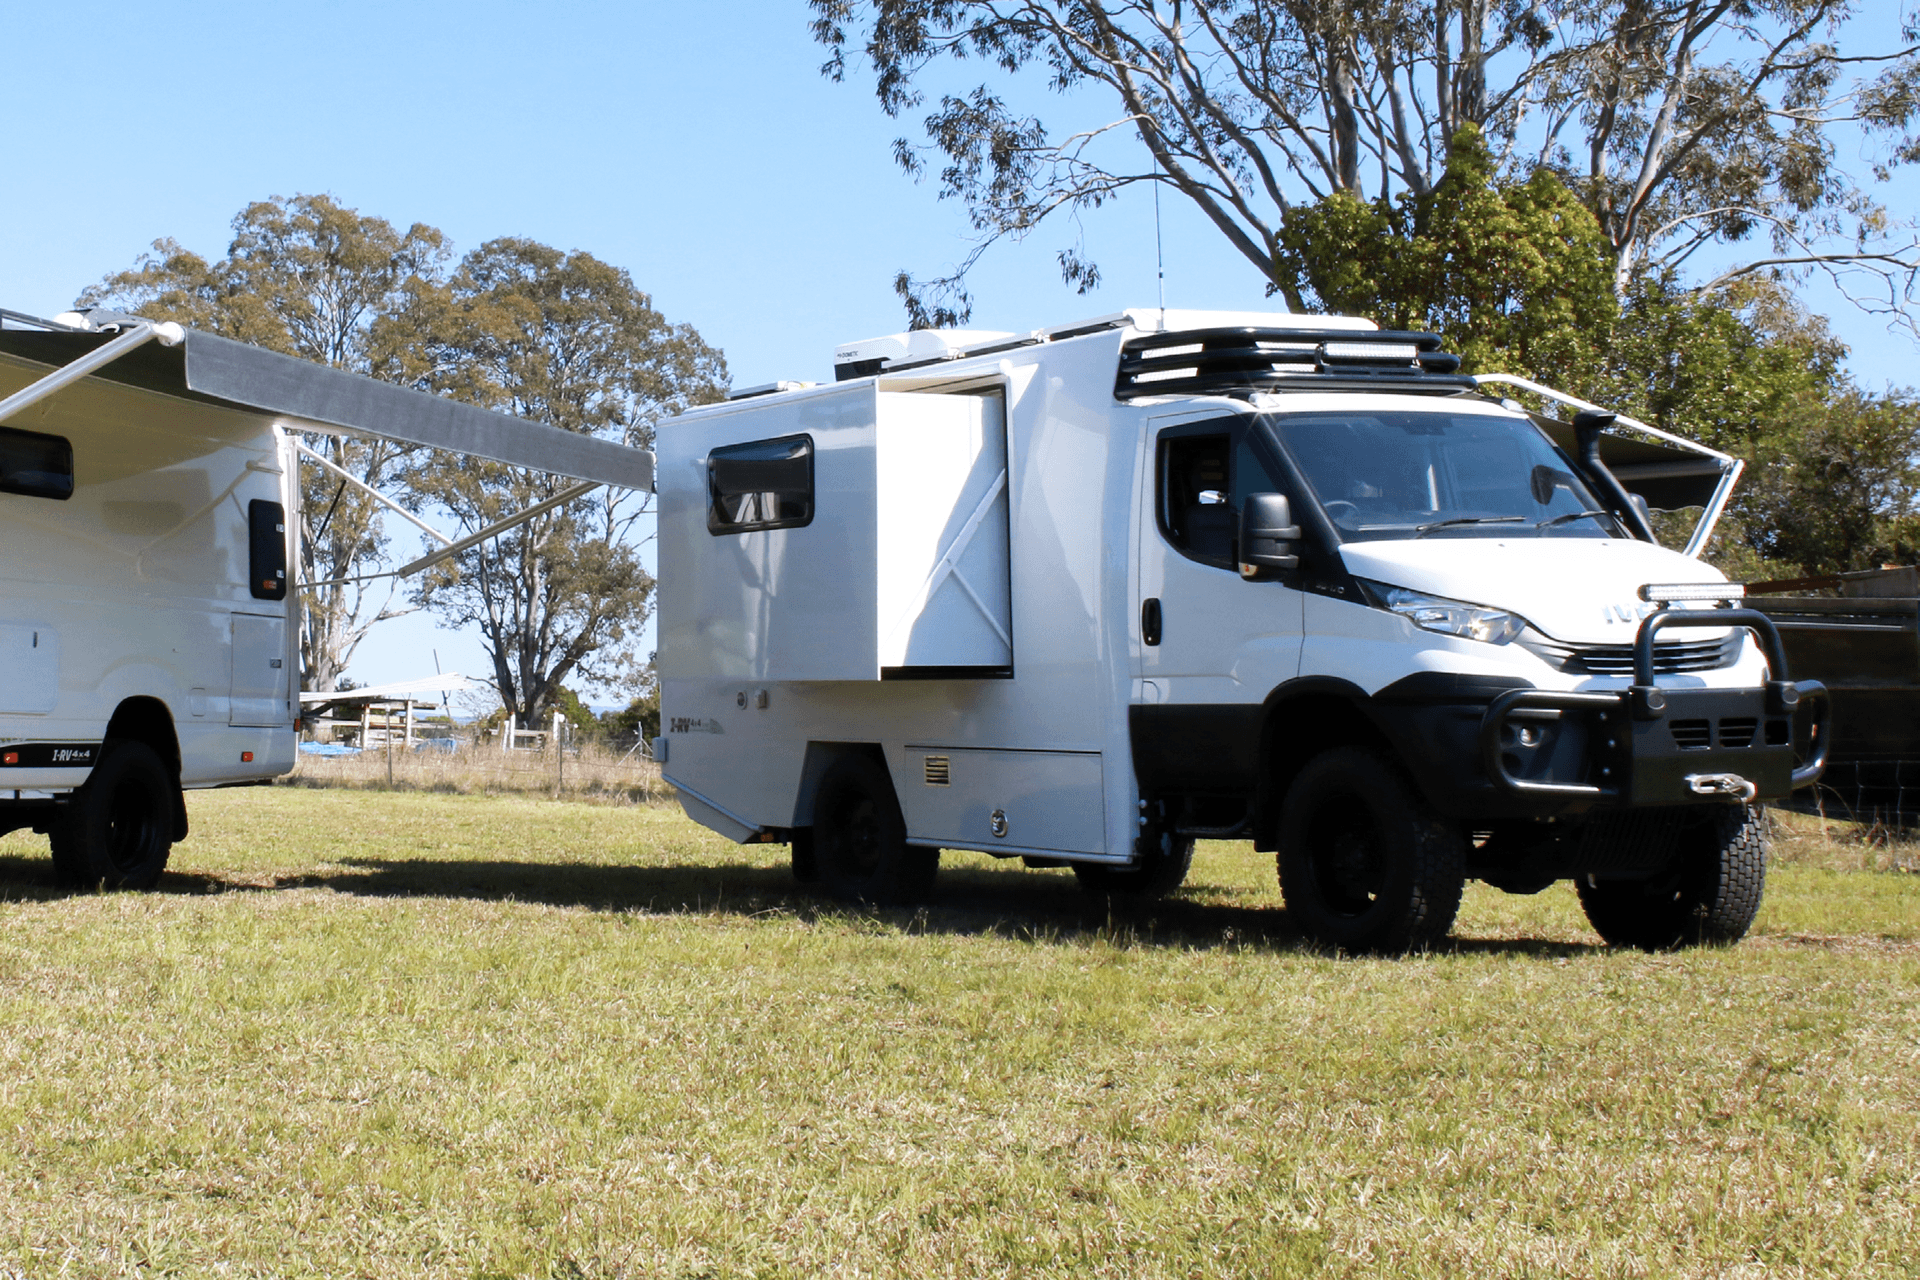 iveco daily 4x4 slide on camper